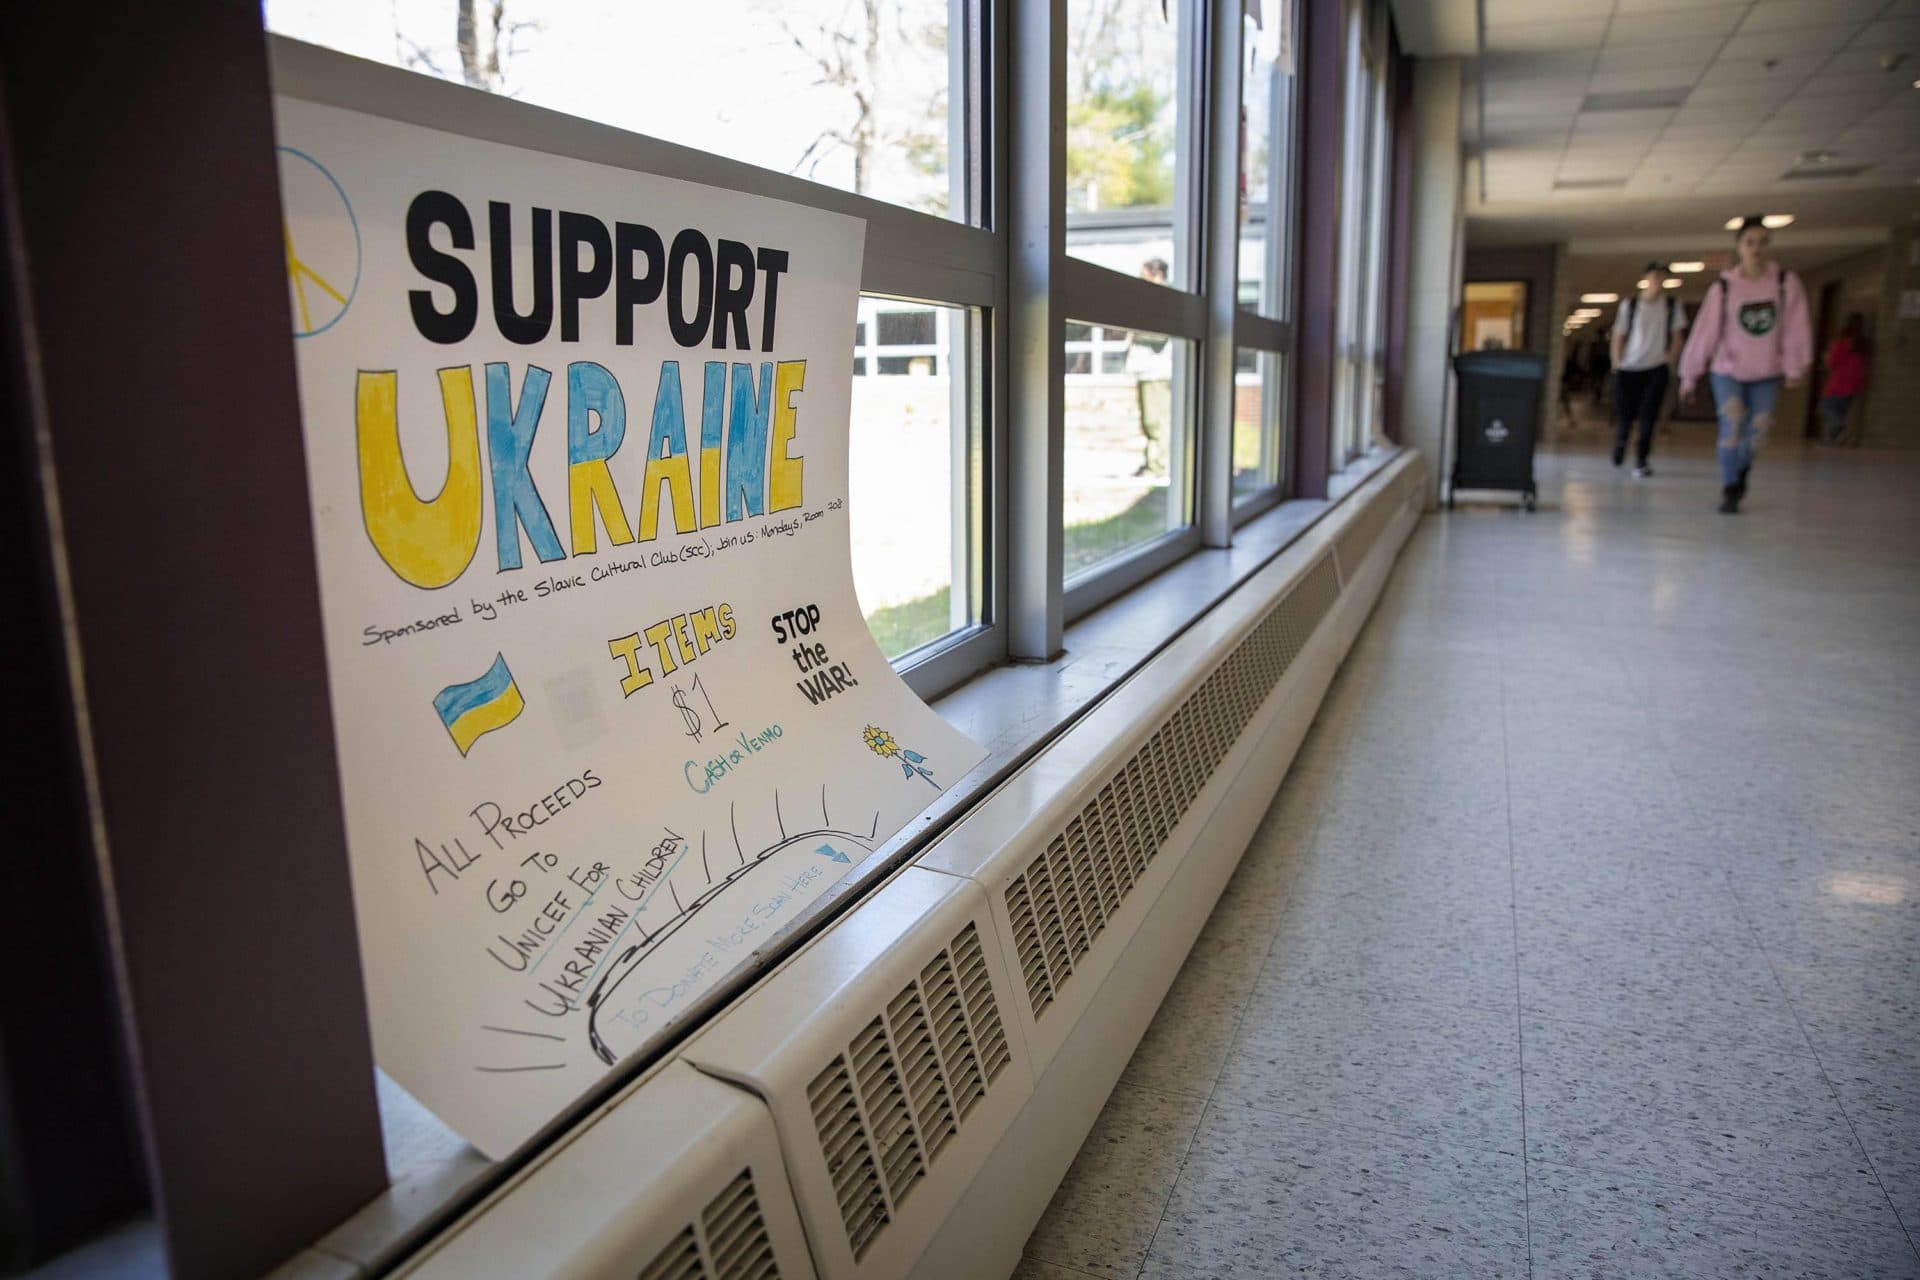 A poster in a hallway at Sharon High School asks students to donate funds in support of Ukrainian children. (Robin Lubbock/WBUR)